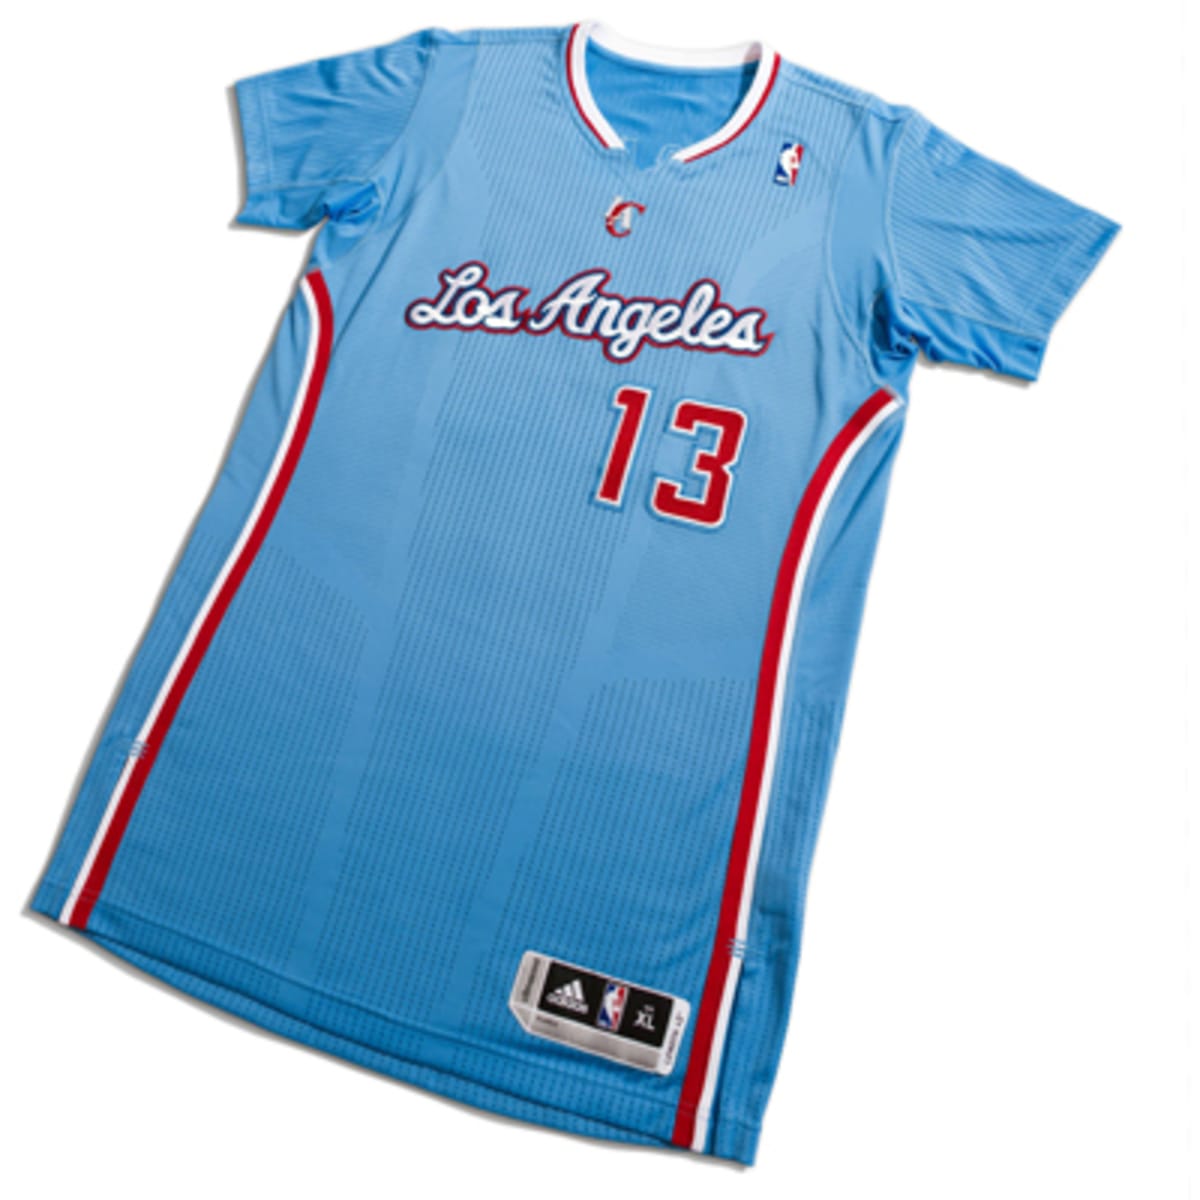 clippers 14 jersey